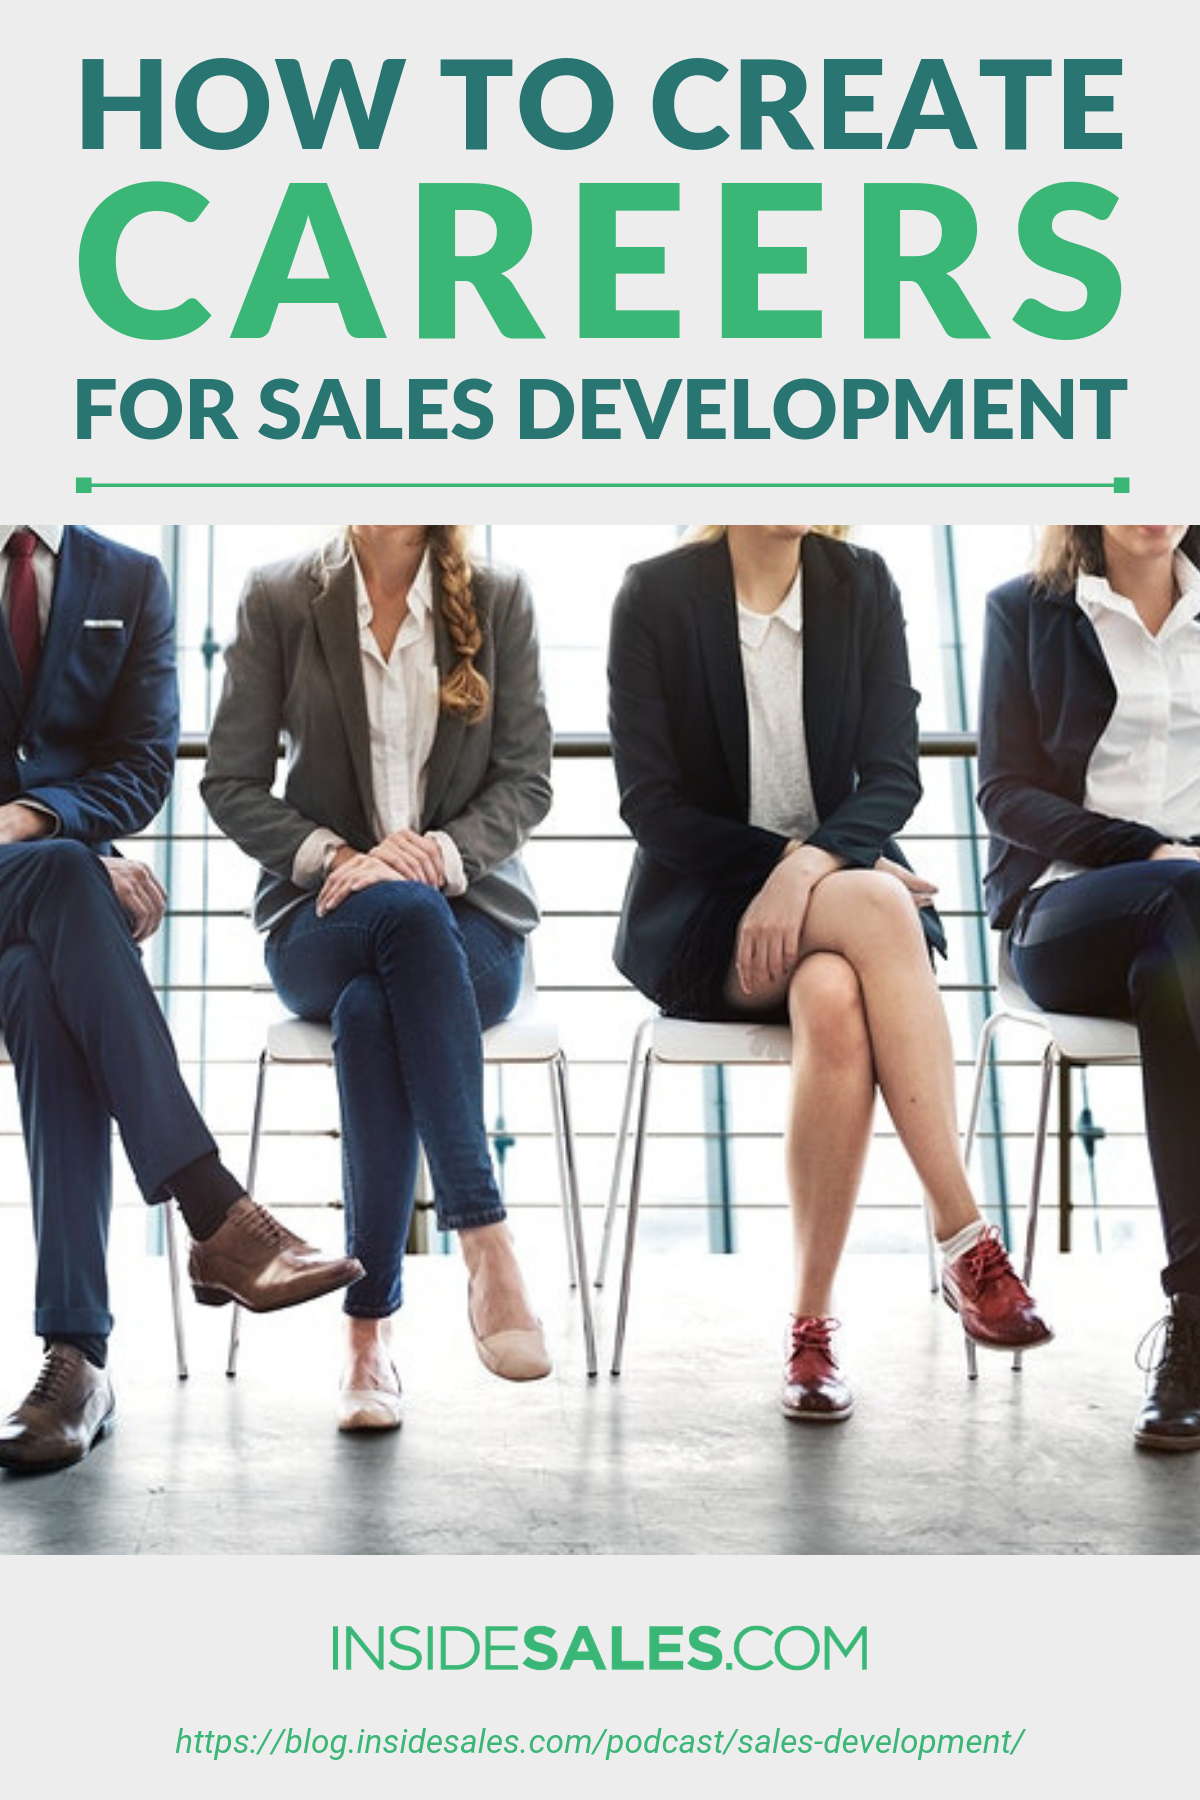 How To Create Careers For Sales Development https://www.insidesales.com/blog/podcast/sales-development/